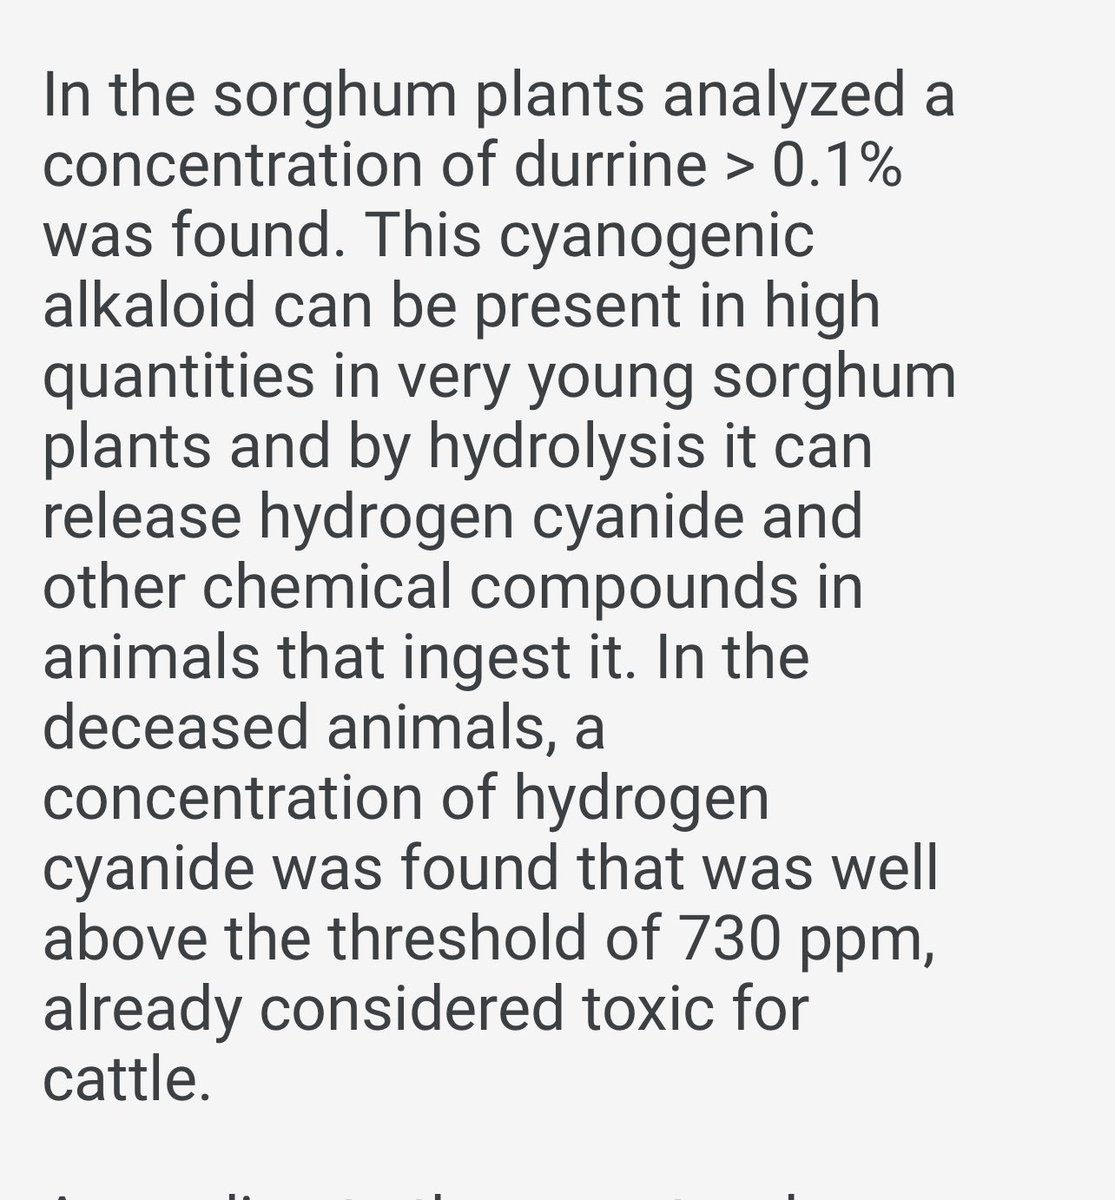 @RobMorningstar @TuckerCarlson @ABC7 The cause of death was cyanide poisoning by drought grown sorghum.